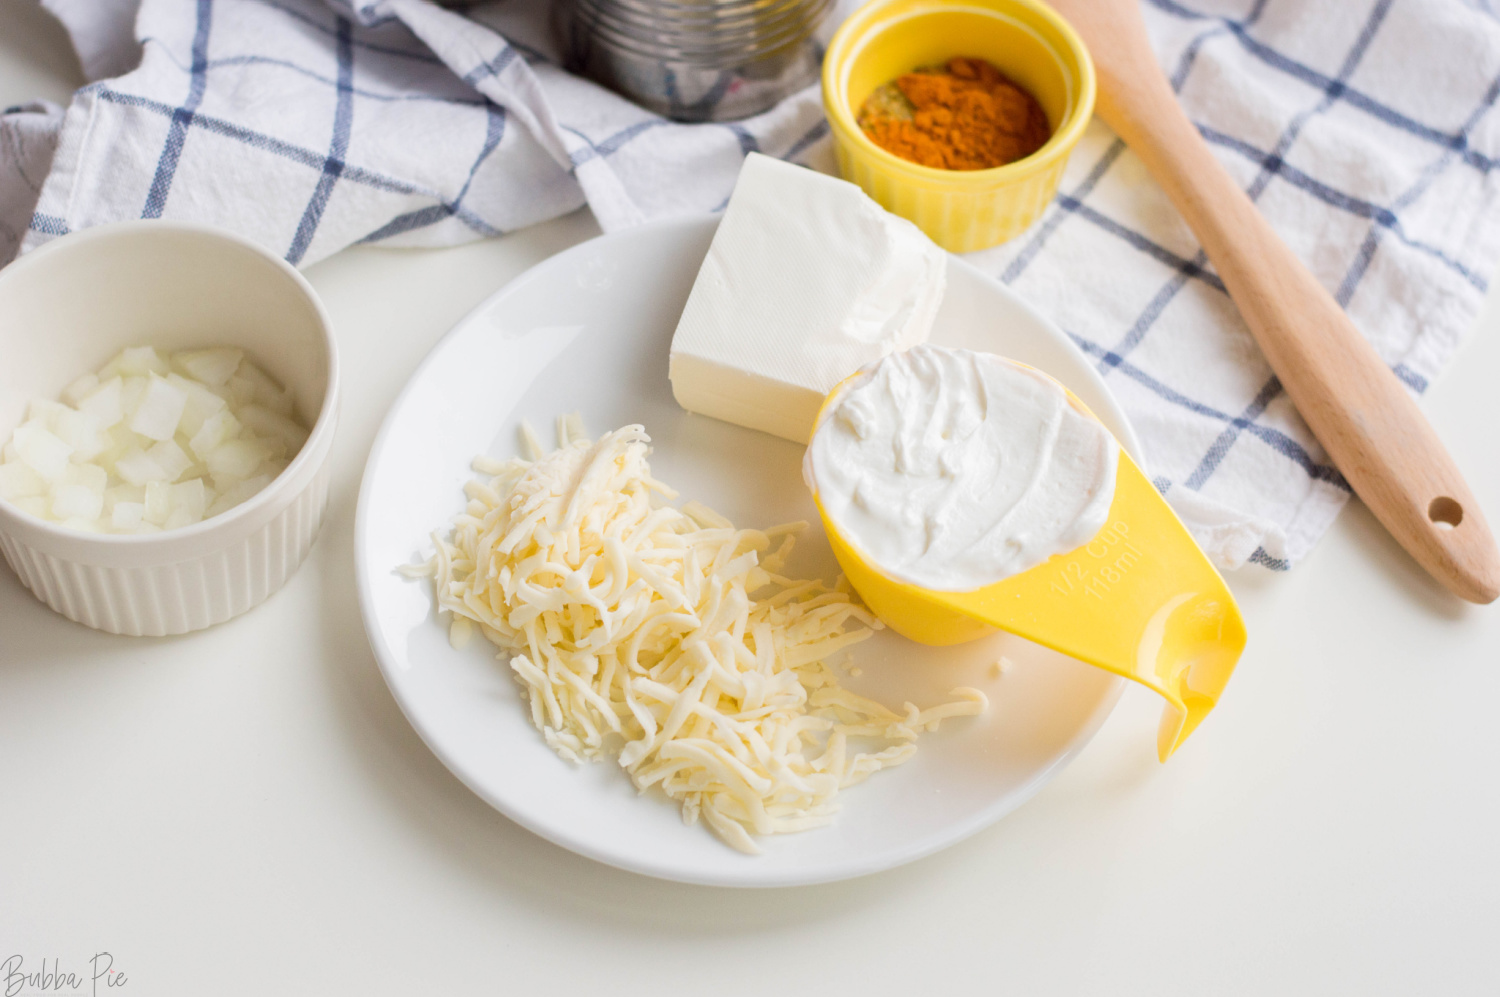 Hot Corn Dip Ingredients are cream cheese, yogurt and cheddar cheese. 